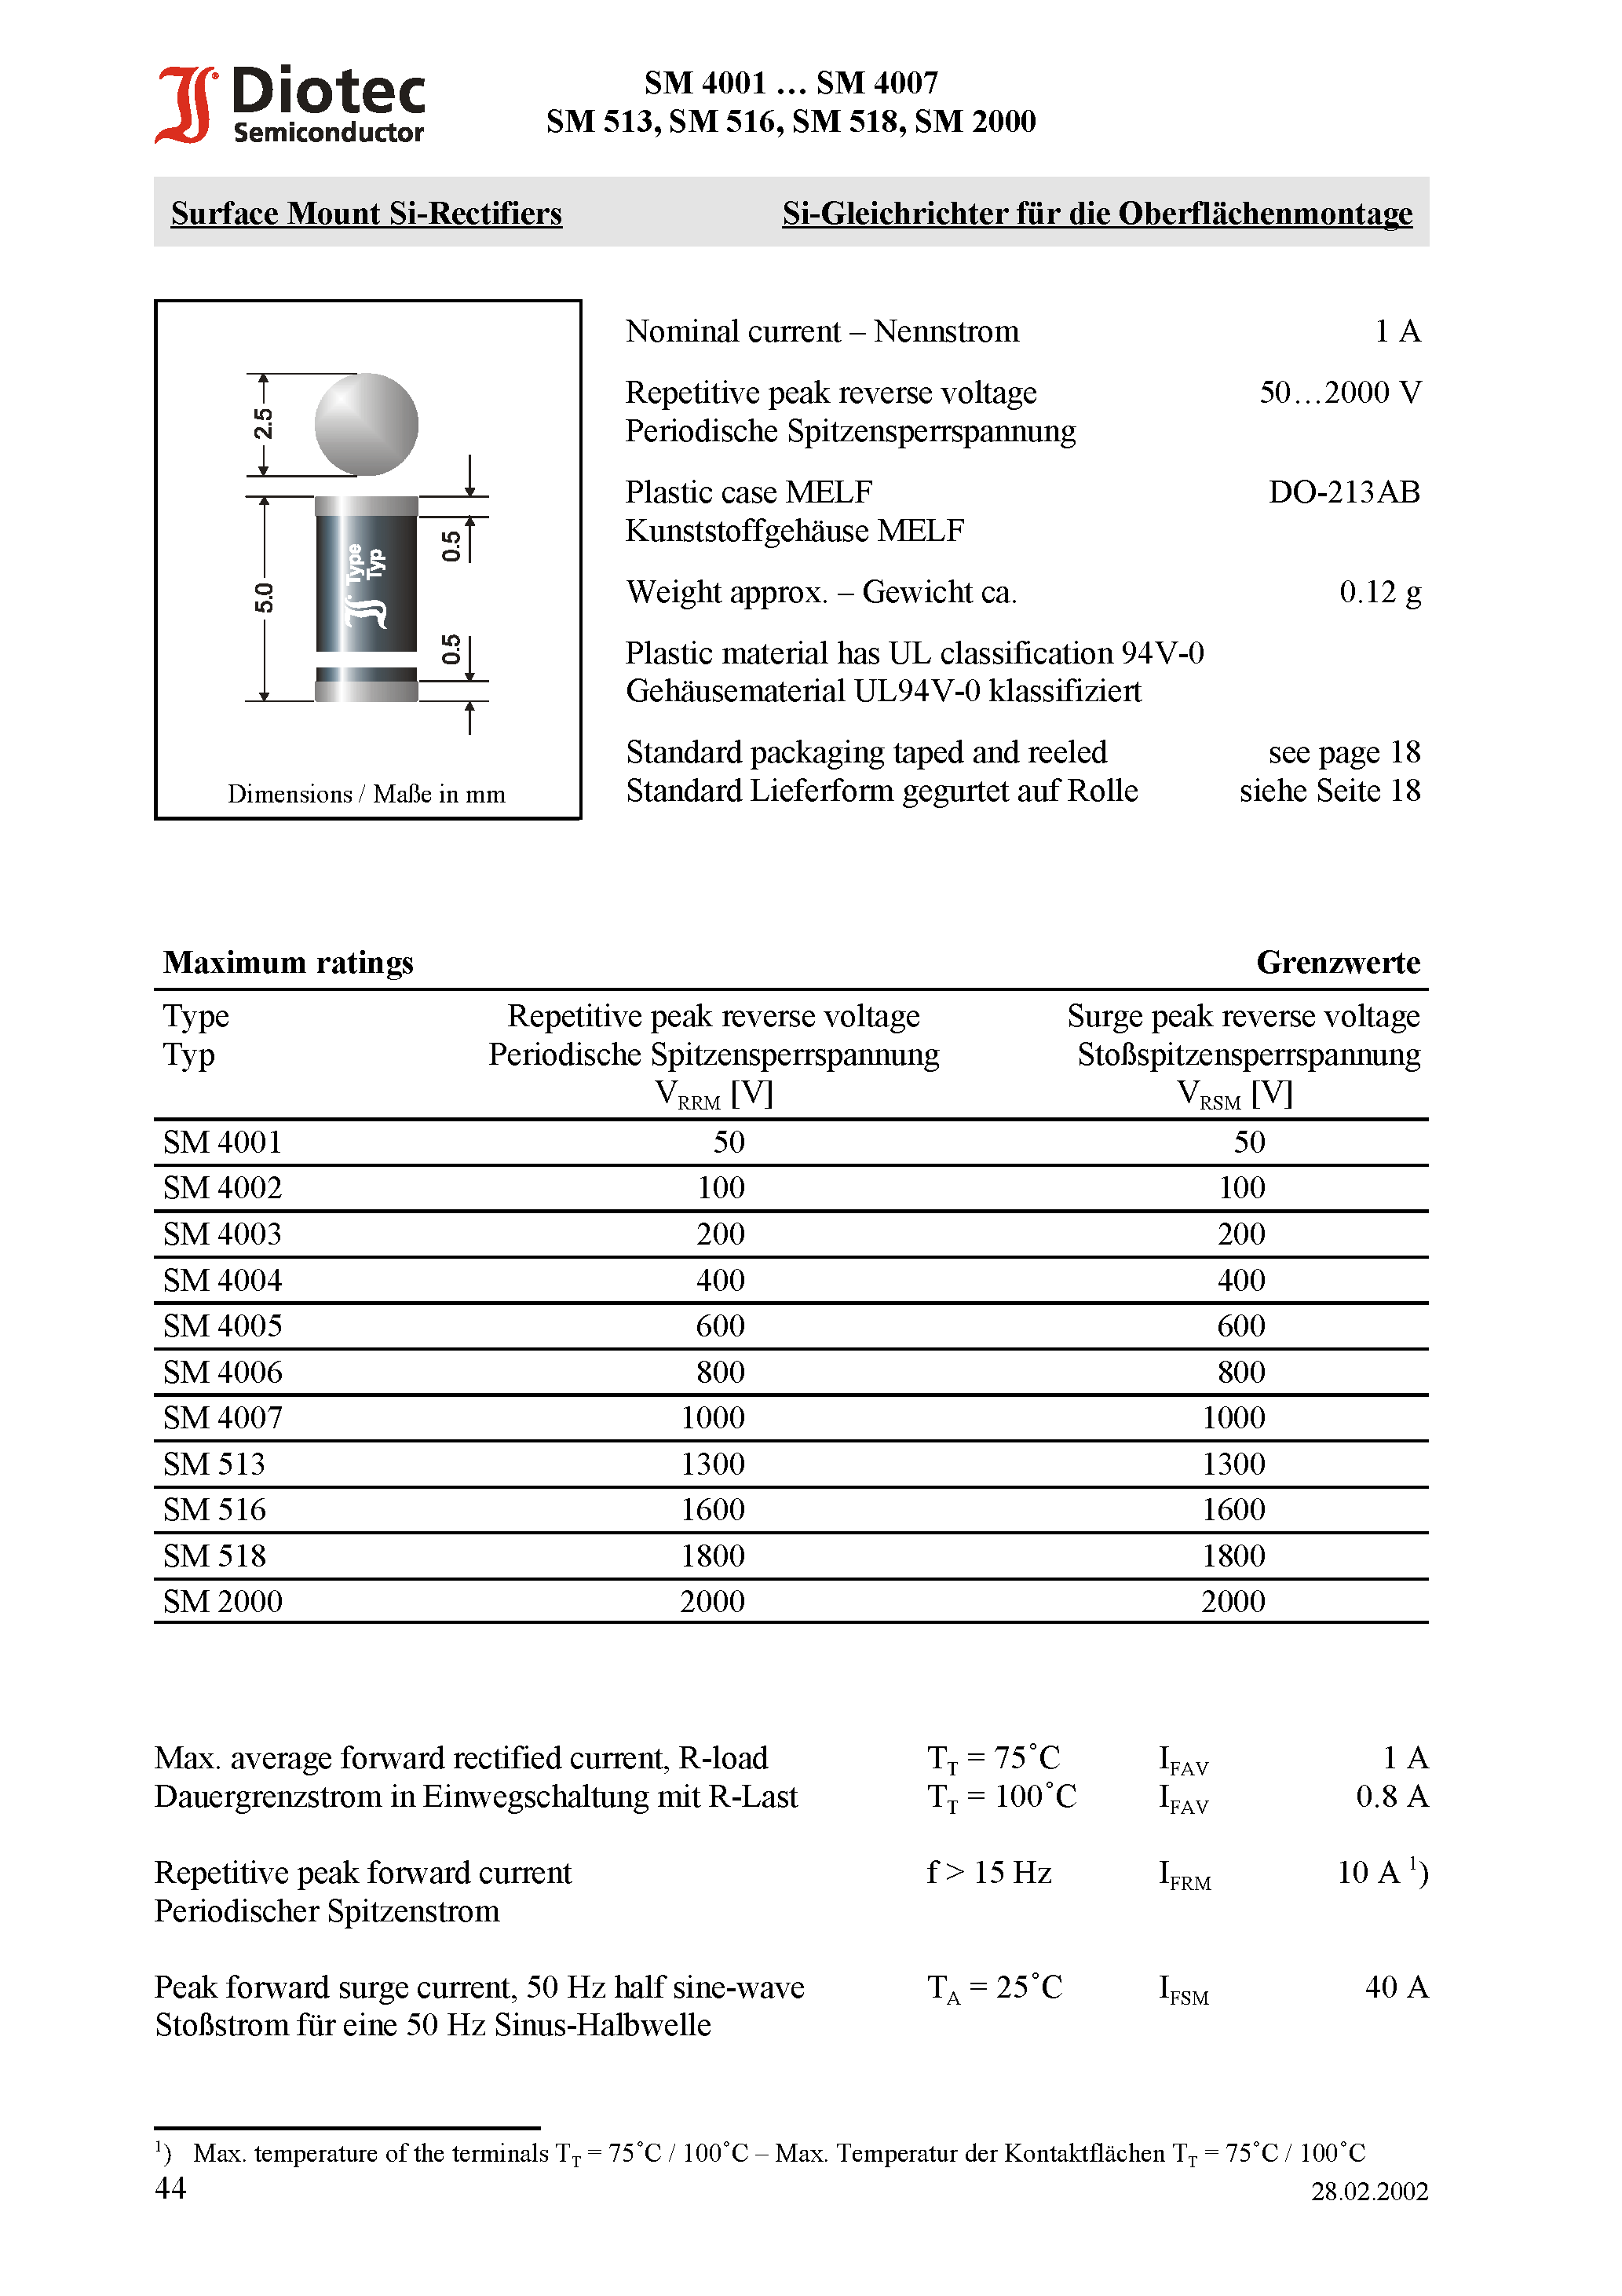 Даташит SM4003 - Surface Mount Si-Rectifiers страница 1